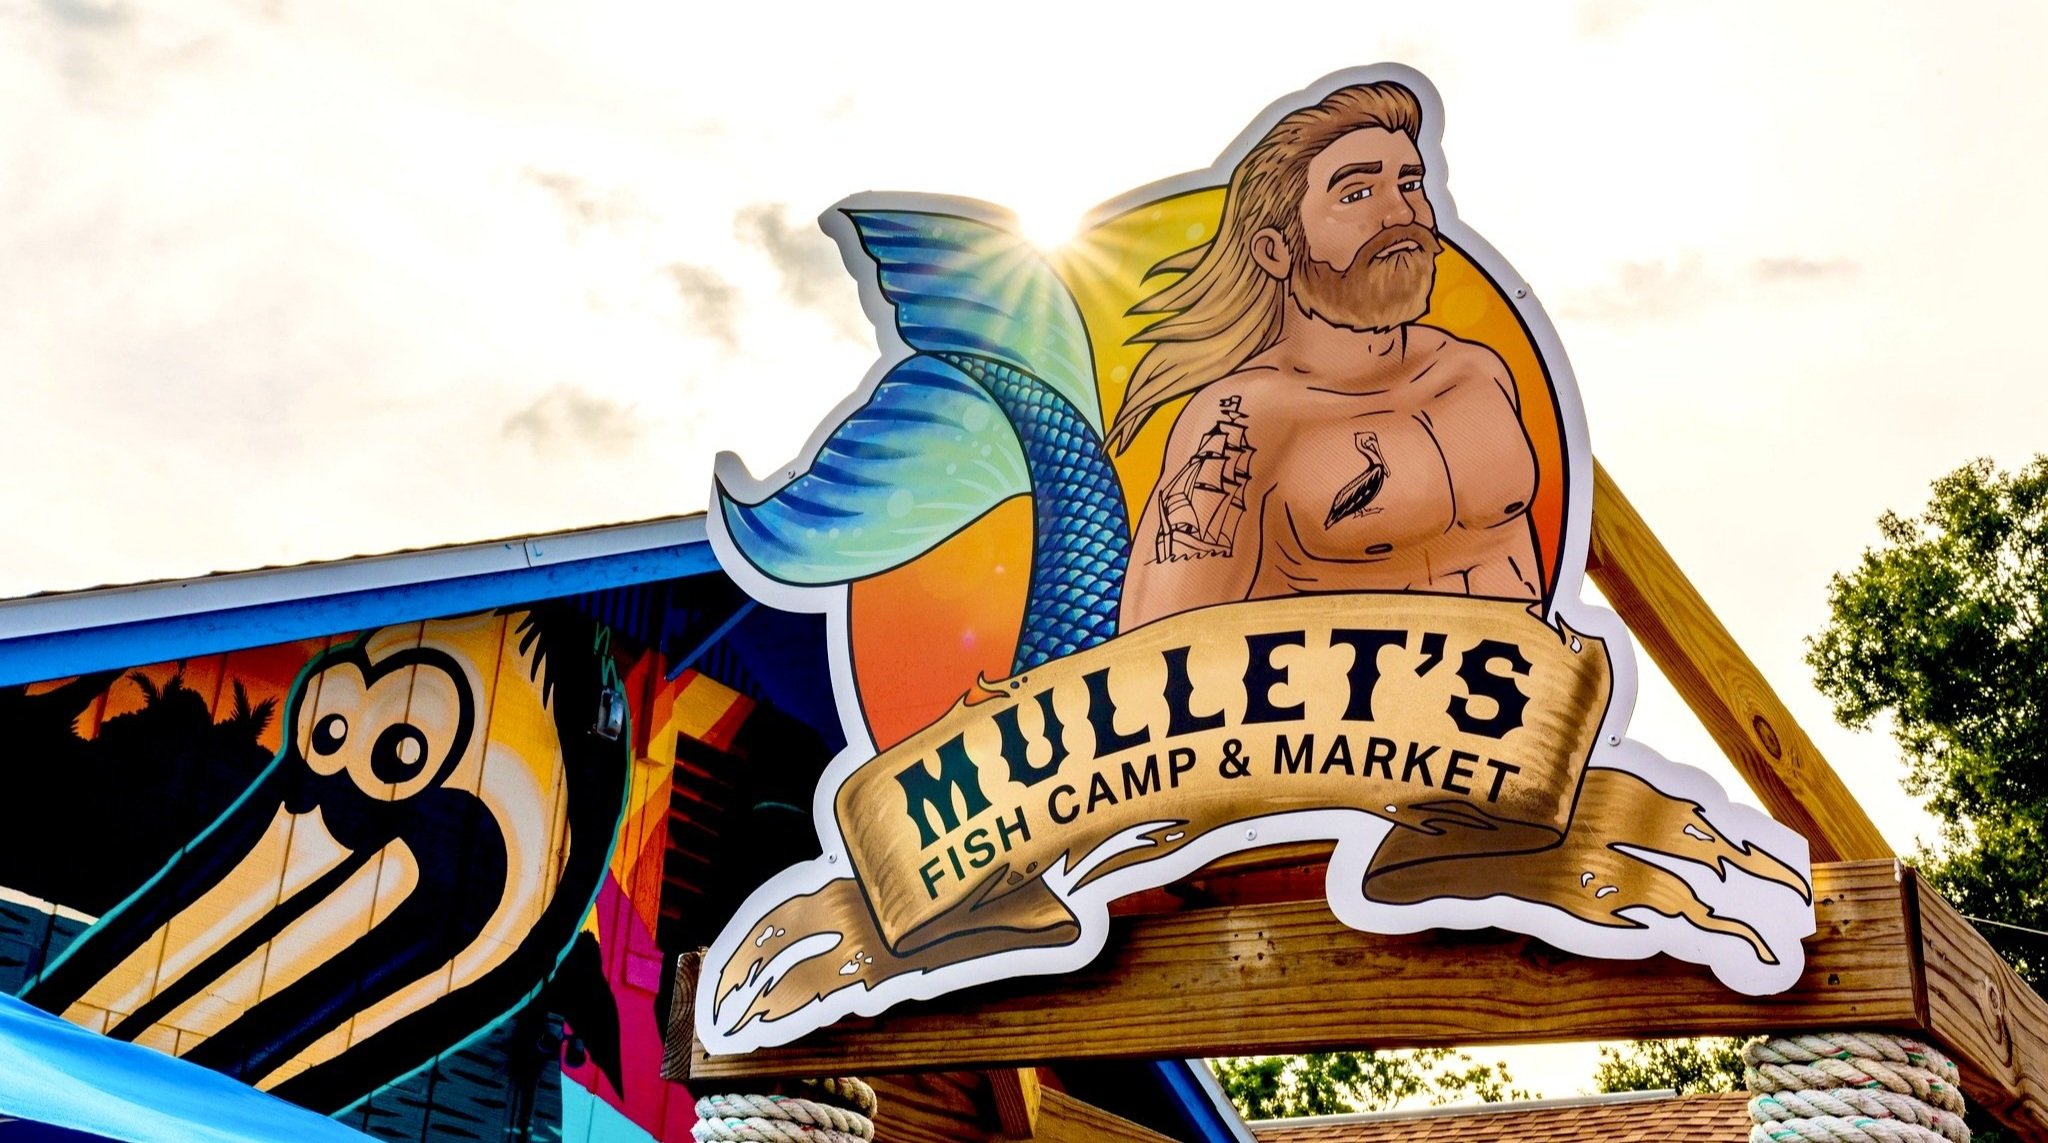 Dessert bar from owners of Mullet's Fish Camp coming soon to south St. Pete